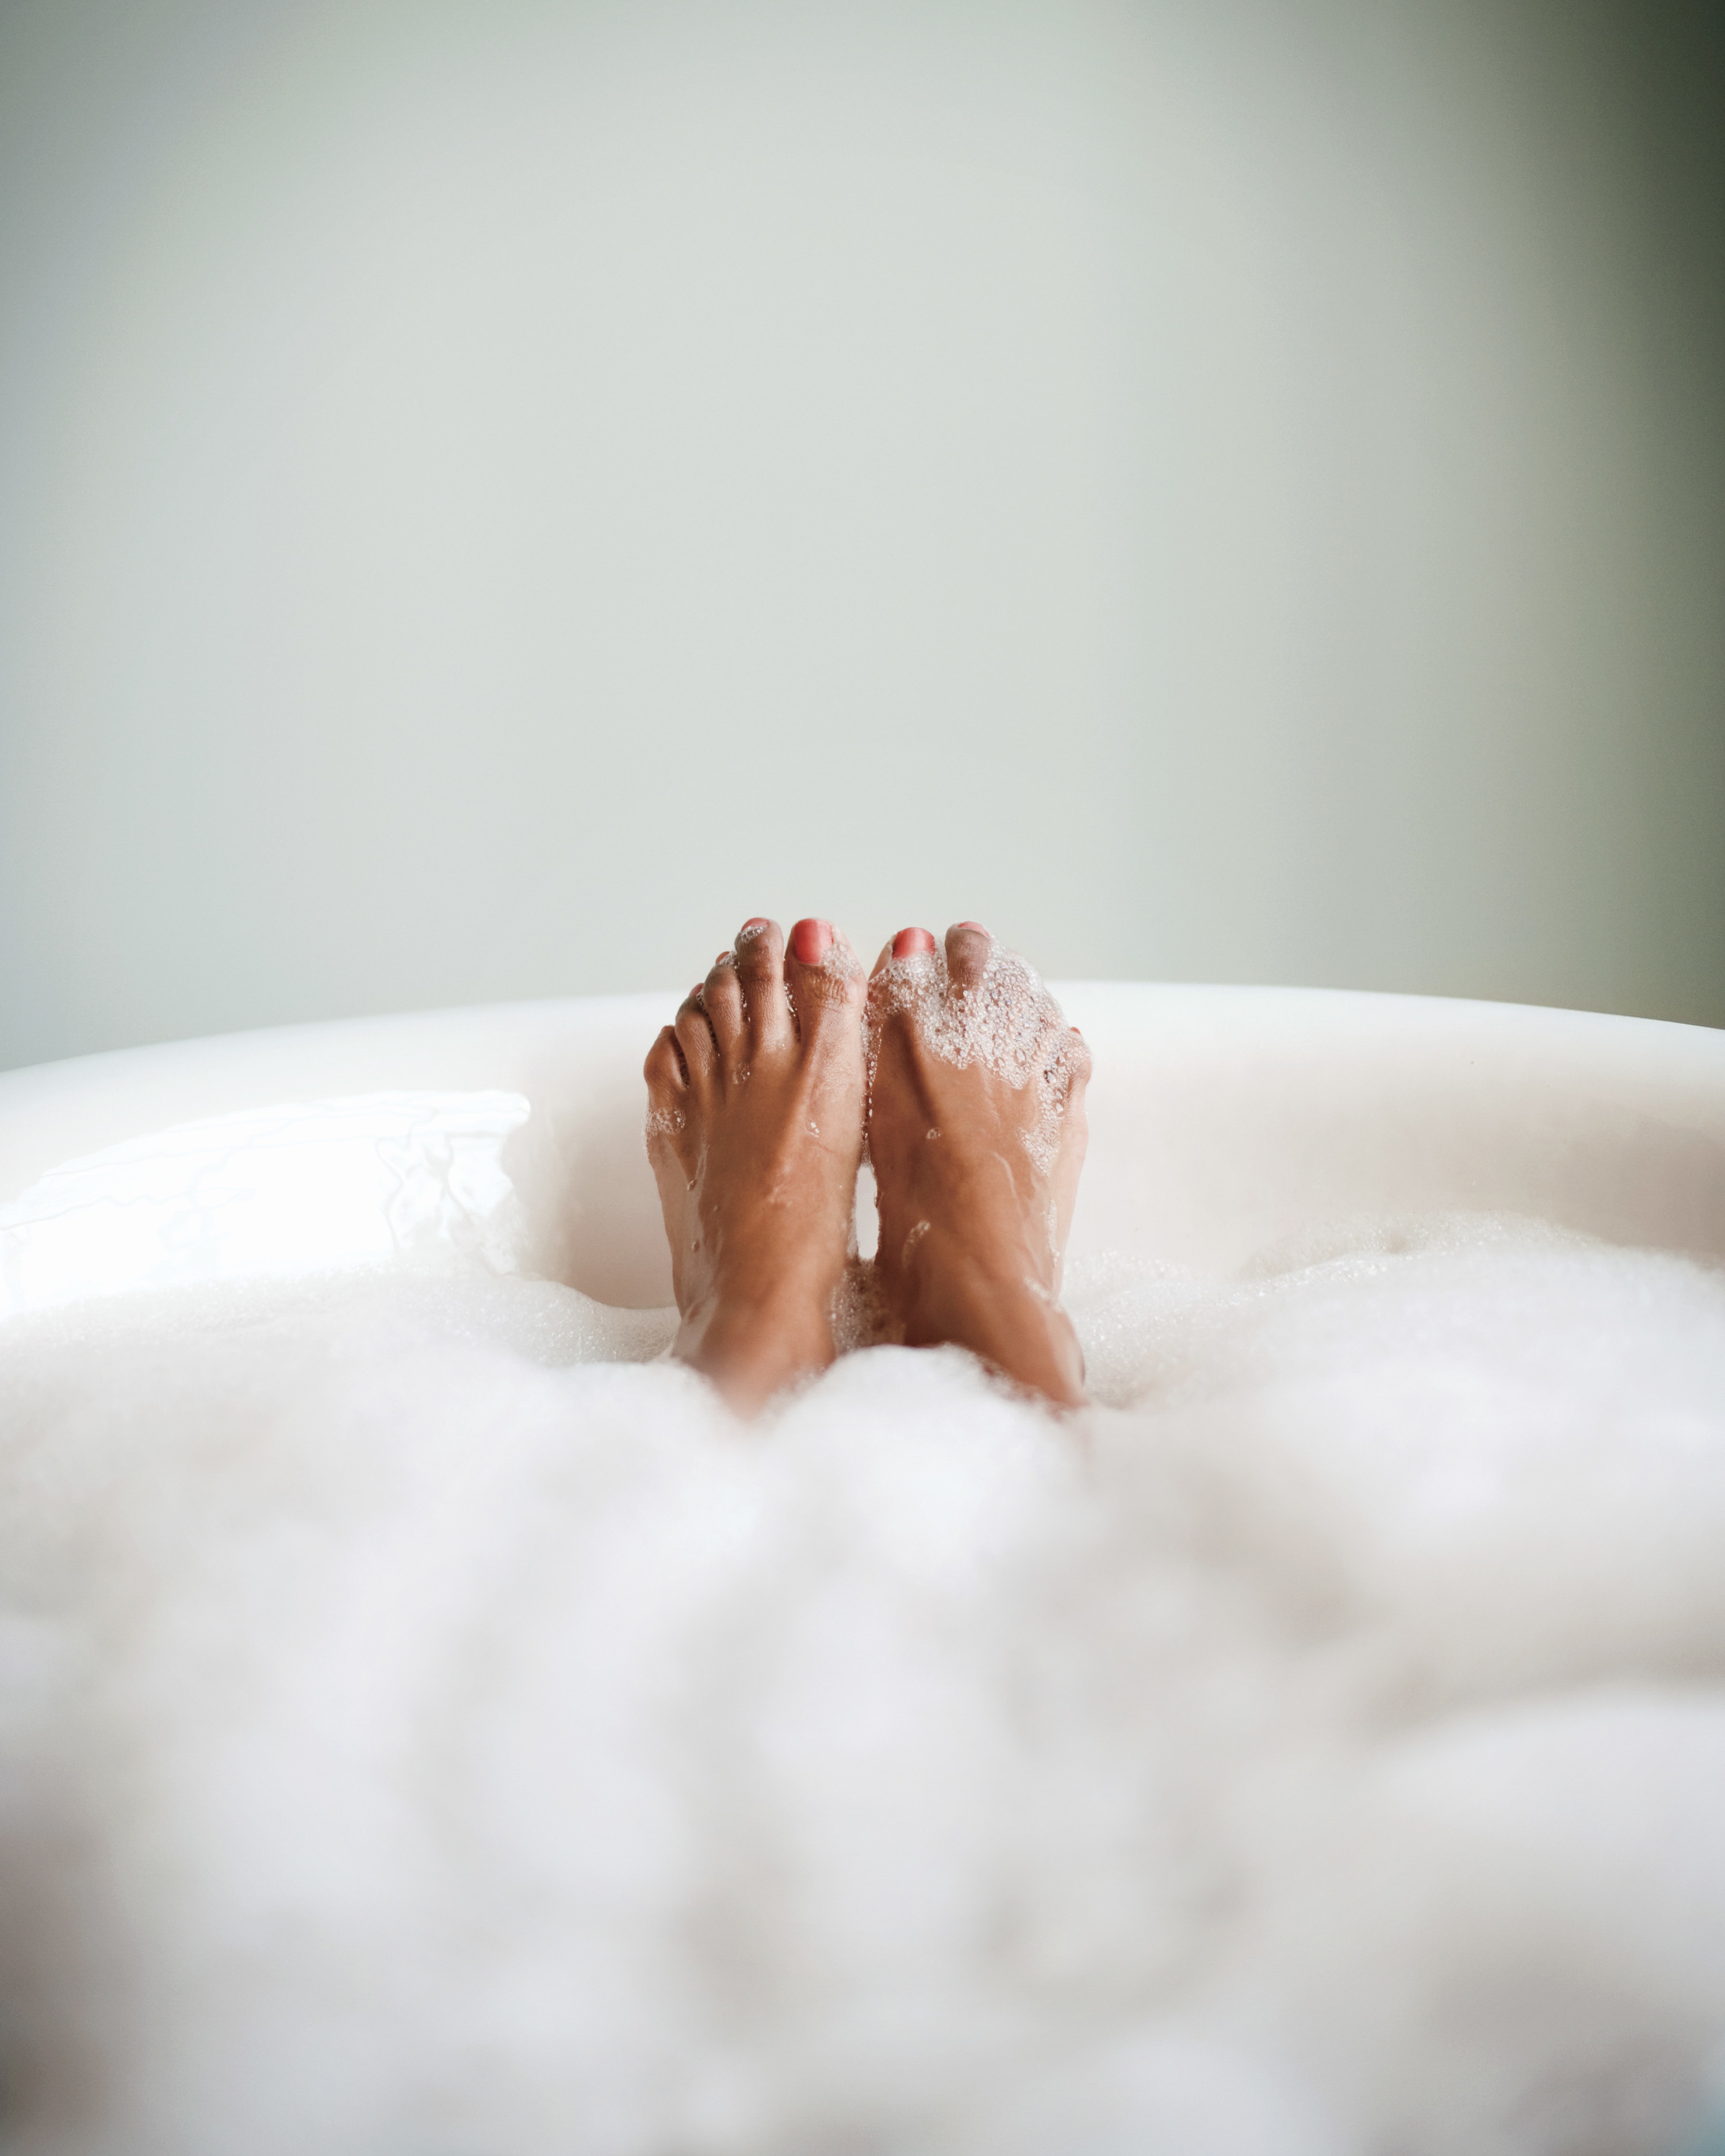 A pair of feet sticking up out of a bubble bath